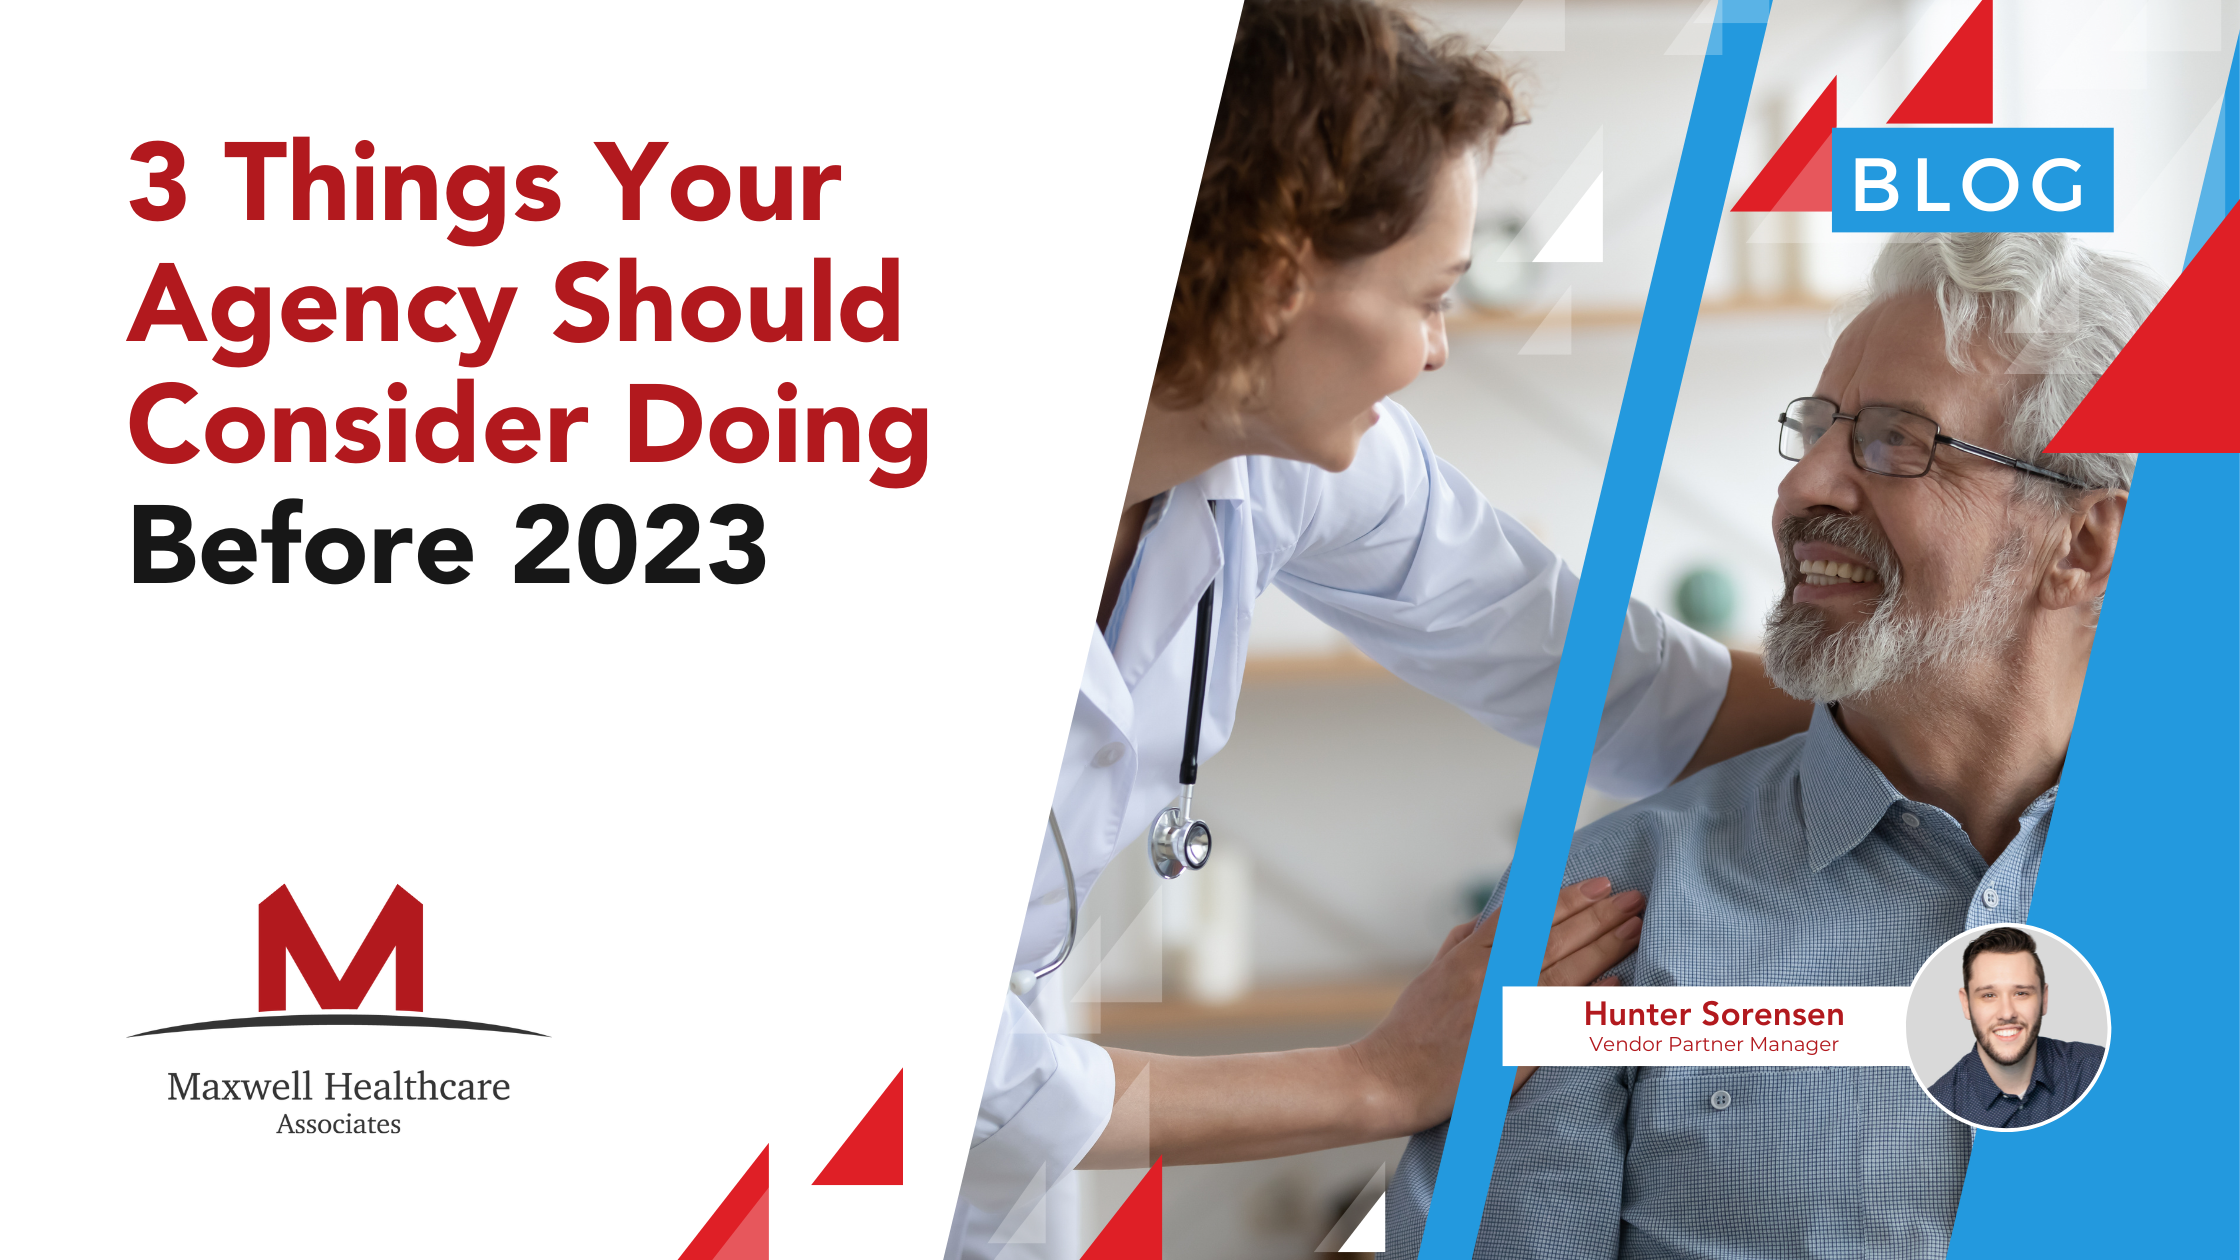 3 Things Your Agency Should Consider Doing Before 2023